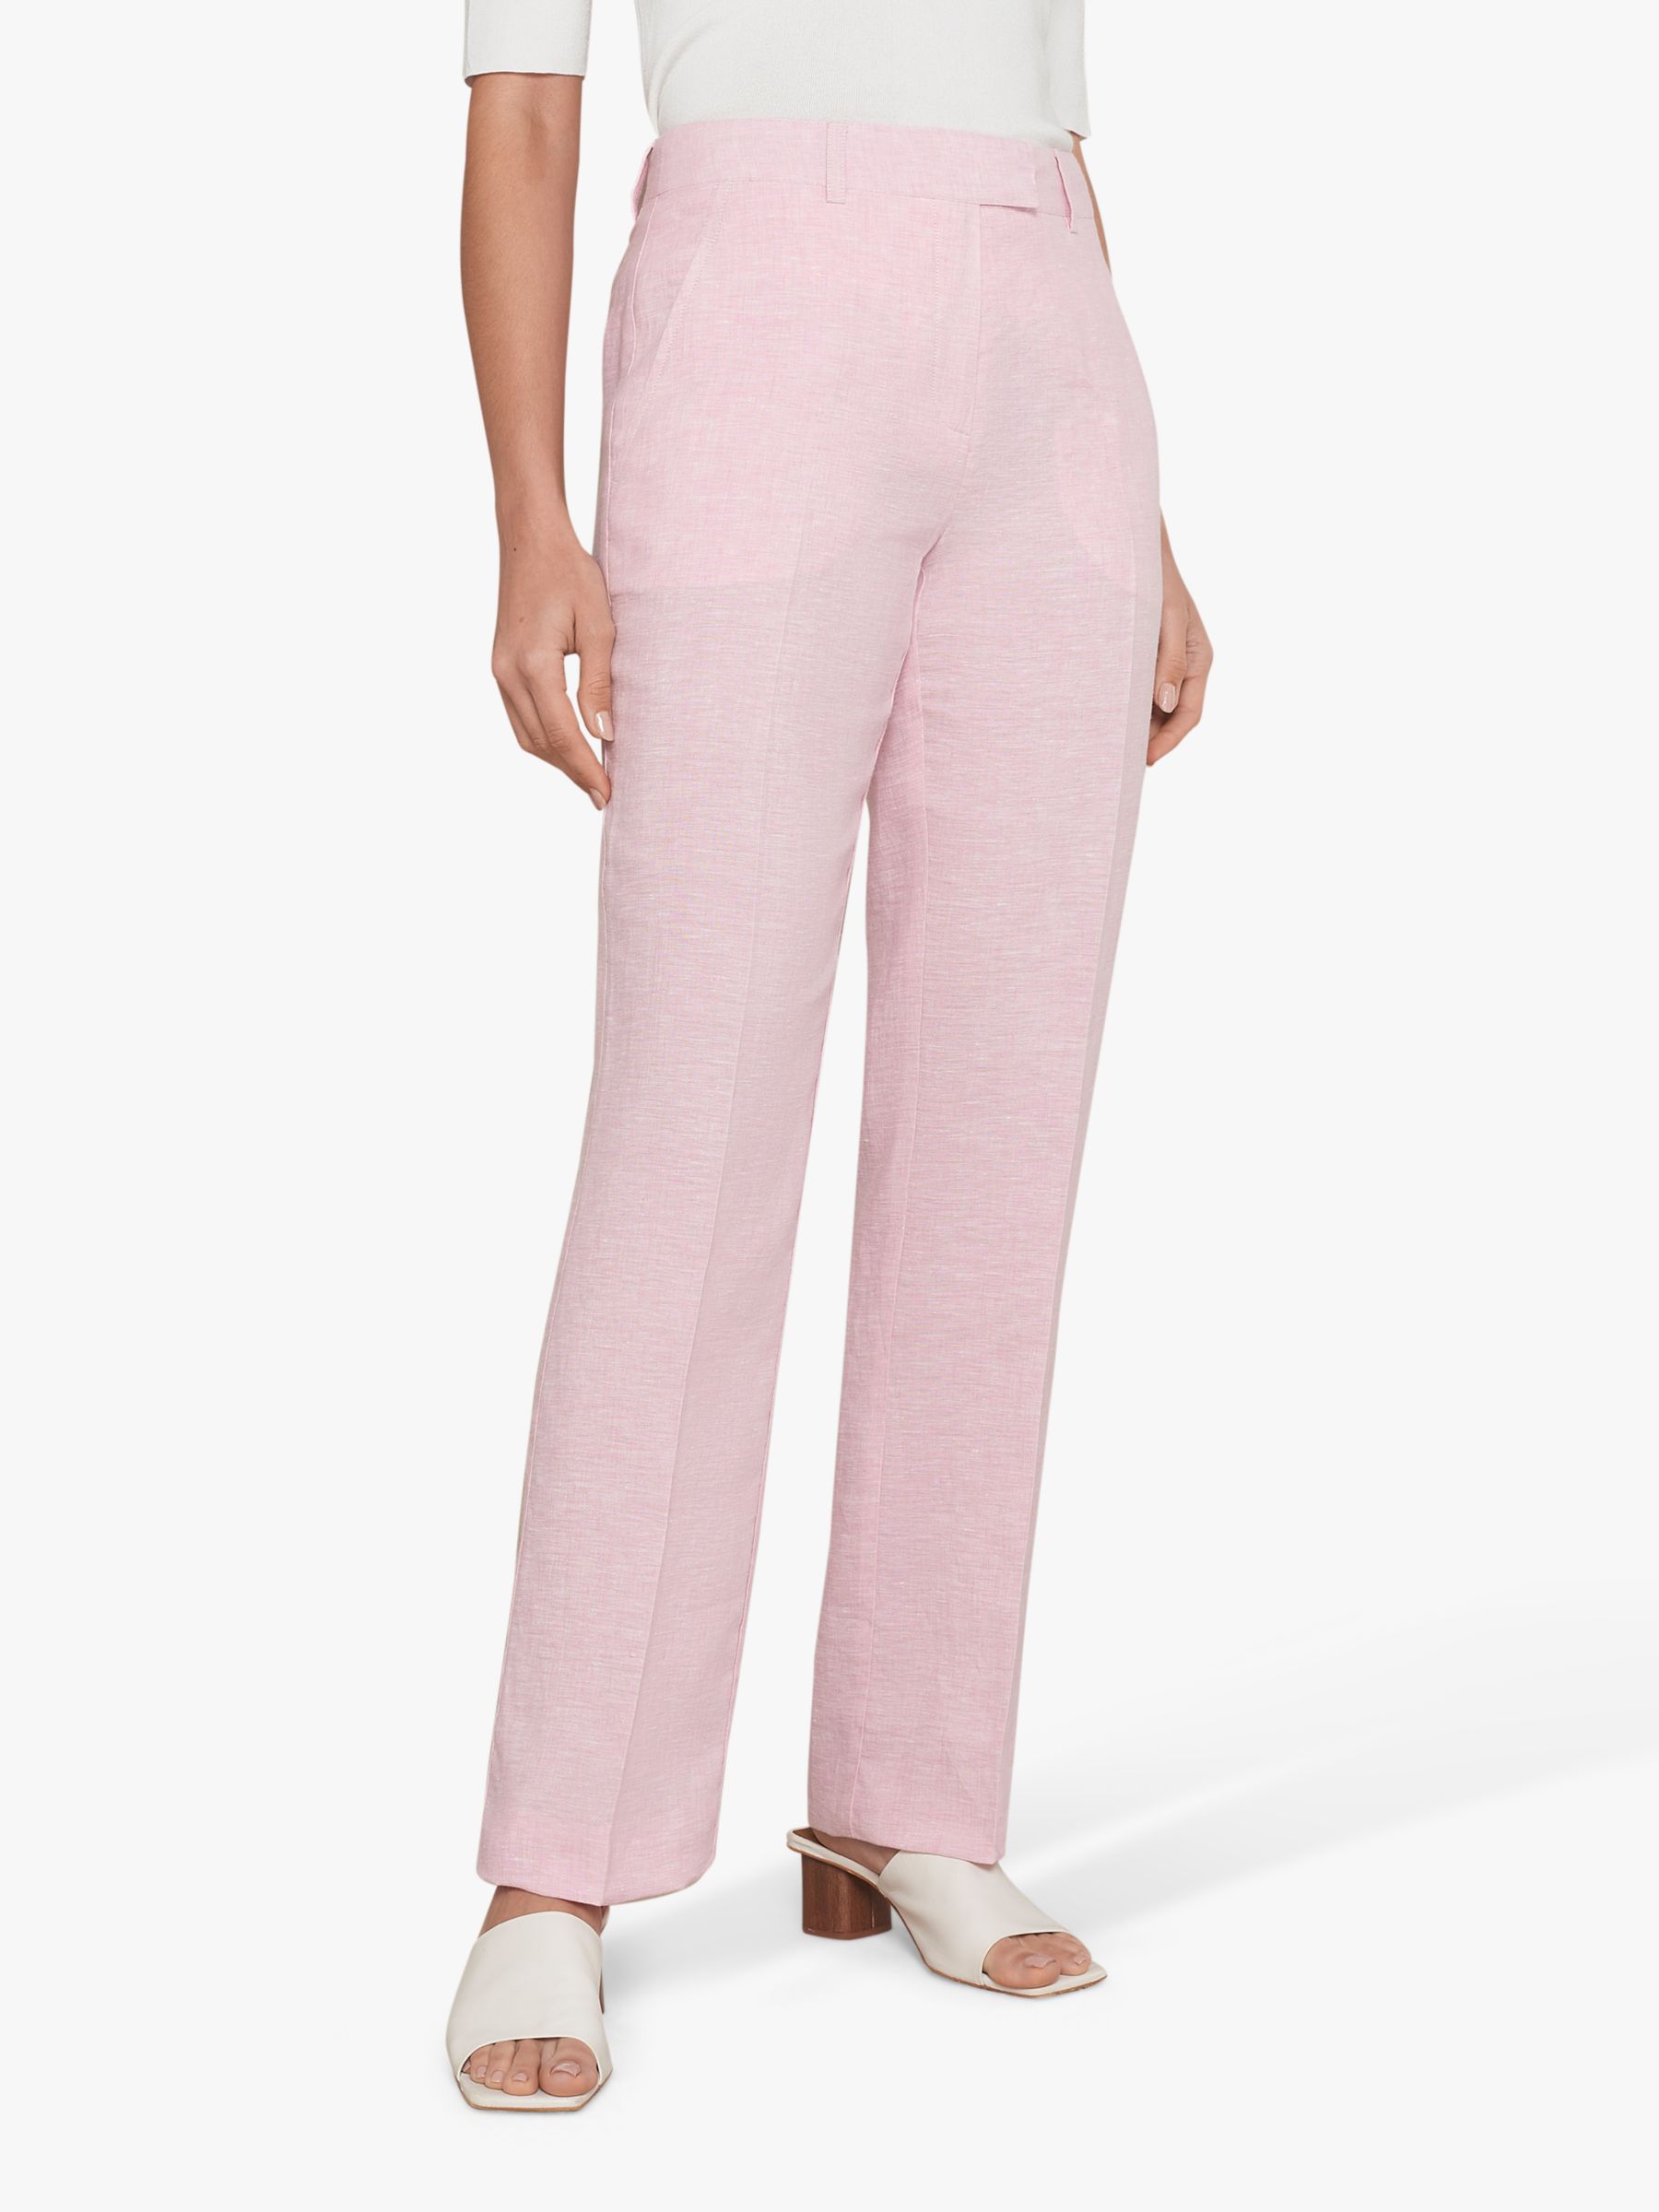 Jaeger Tapered Linen Trousers, Light Pink at John Lewis & Partners